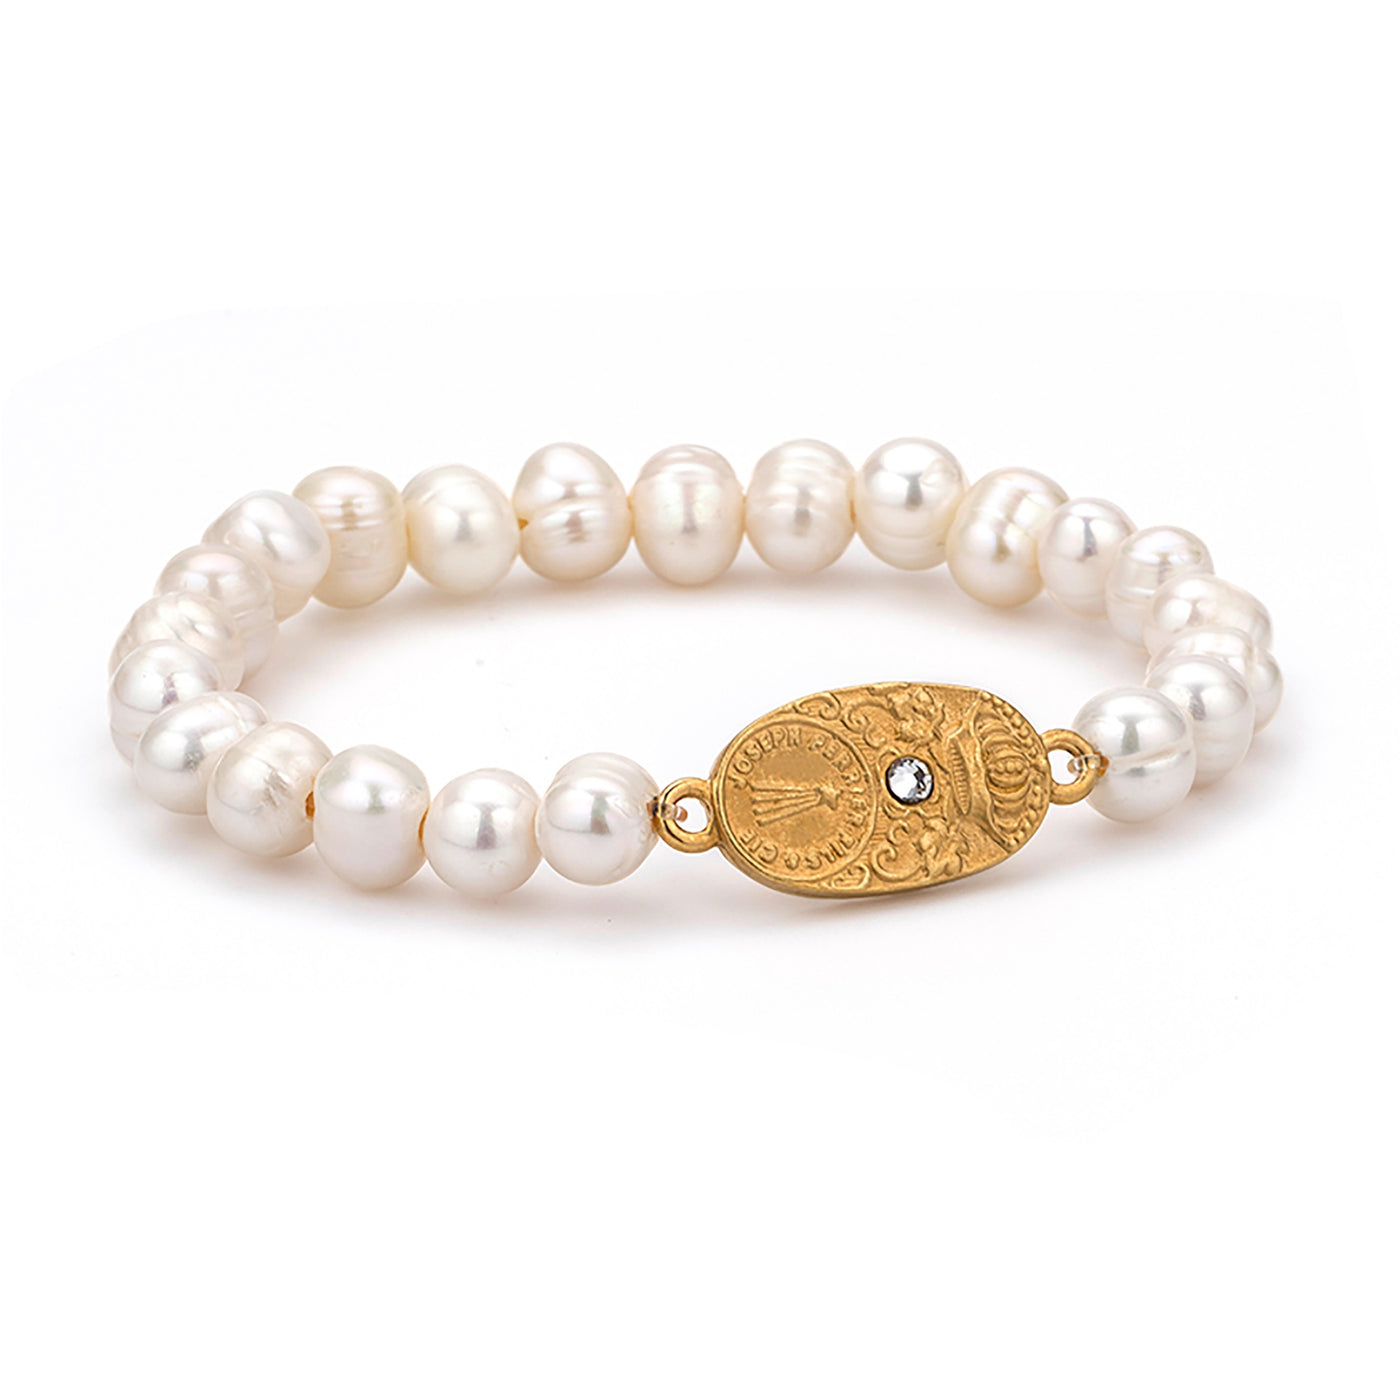 Freshwater Pearl Bracelet with 24k Gold Plated Connector